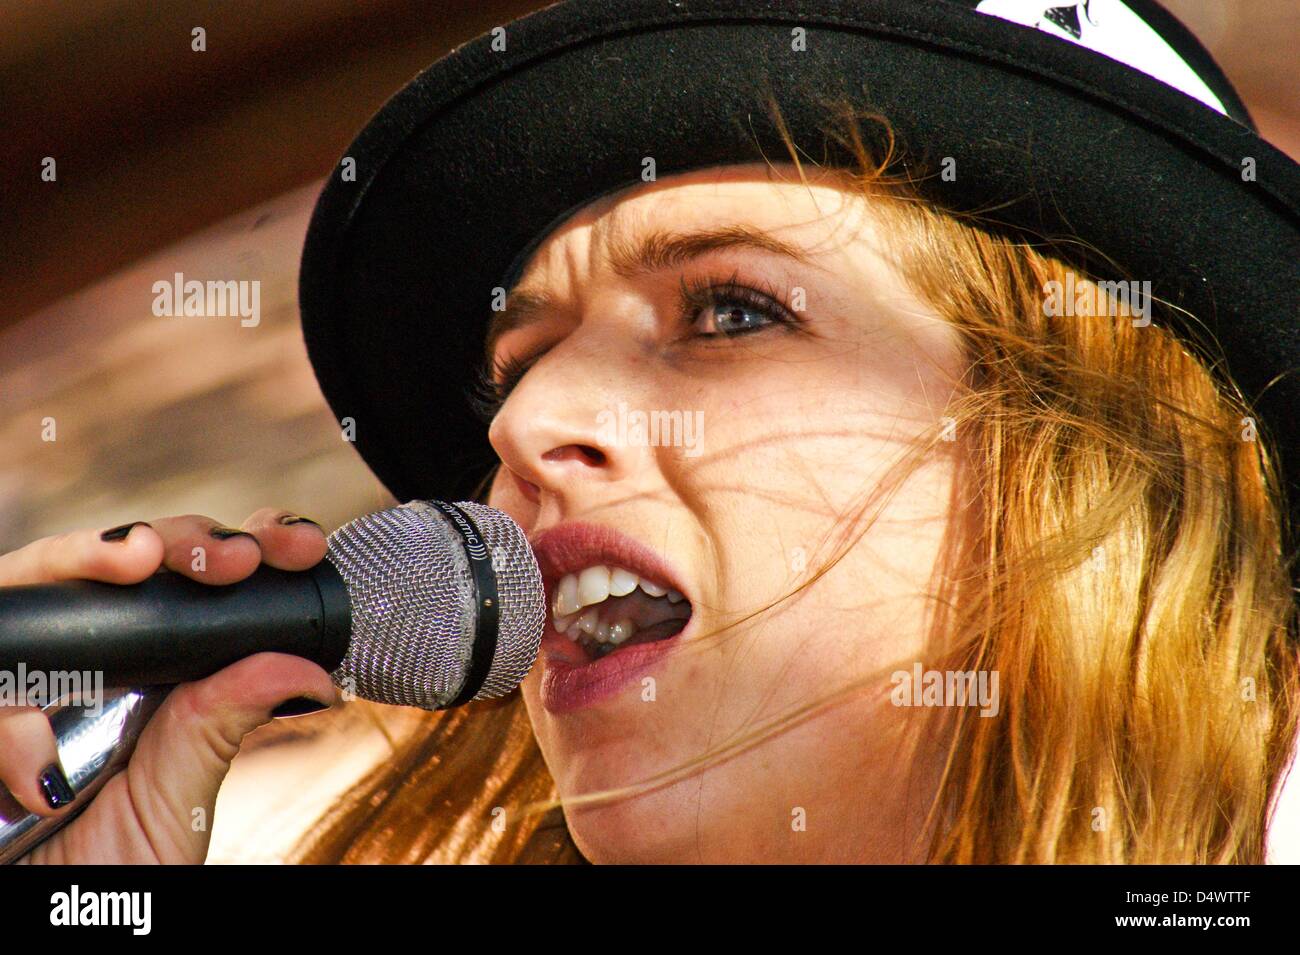 March 16, 2013 - Austin, Texas, U.S. - California based ZZ Ward knocks the crowd dead on the rooftop of Whole Foods World Headquarters in Austin,Texas on 03/16/2013 at a showcase day party hosted by Quantum Collective during SXSW.Ms. Ward's first album '''til the casket drops'' is in heavy rotation on alternative radio.She was widely regarded as one of the hottest acts of the music portion of the conference.(Credit Image: © Jeff Newman/Globe Photos/ZUMAPRESS.com) Stock Photo